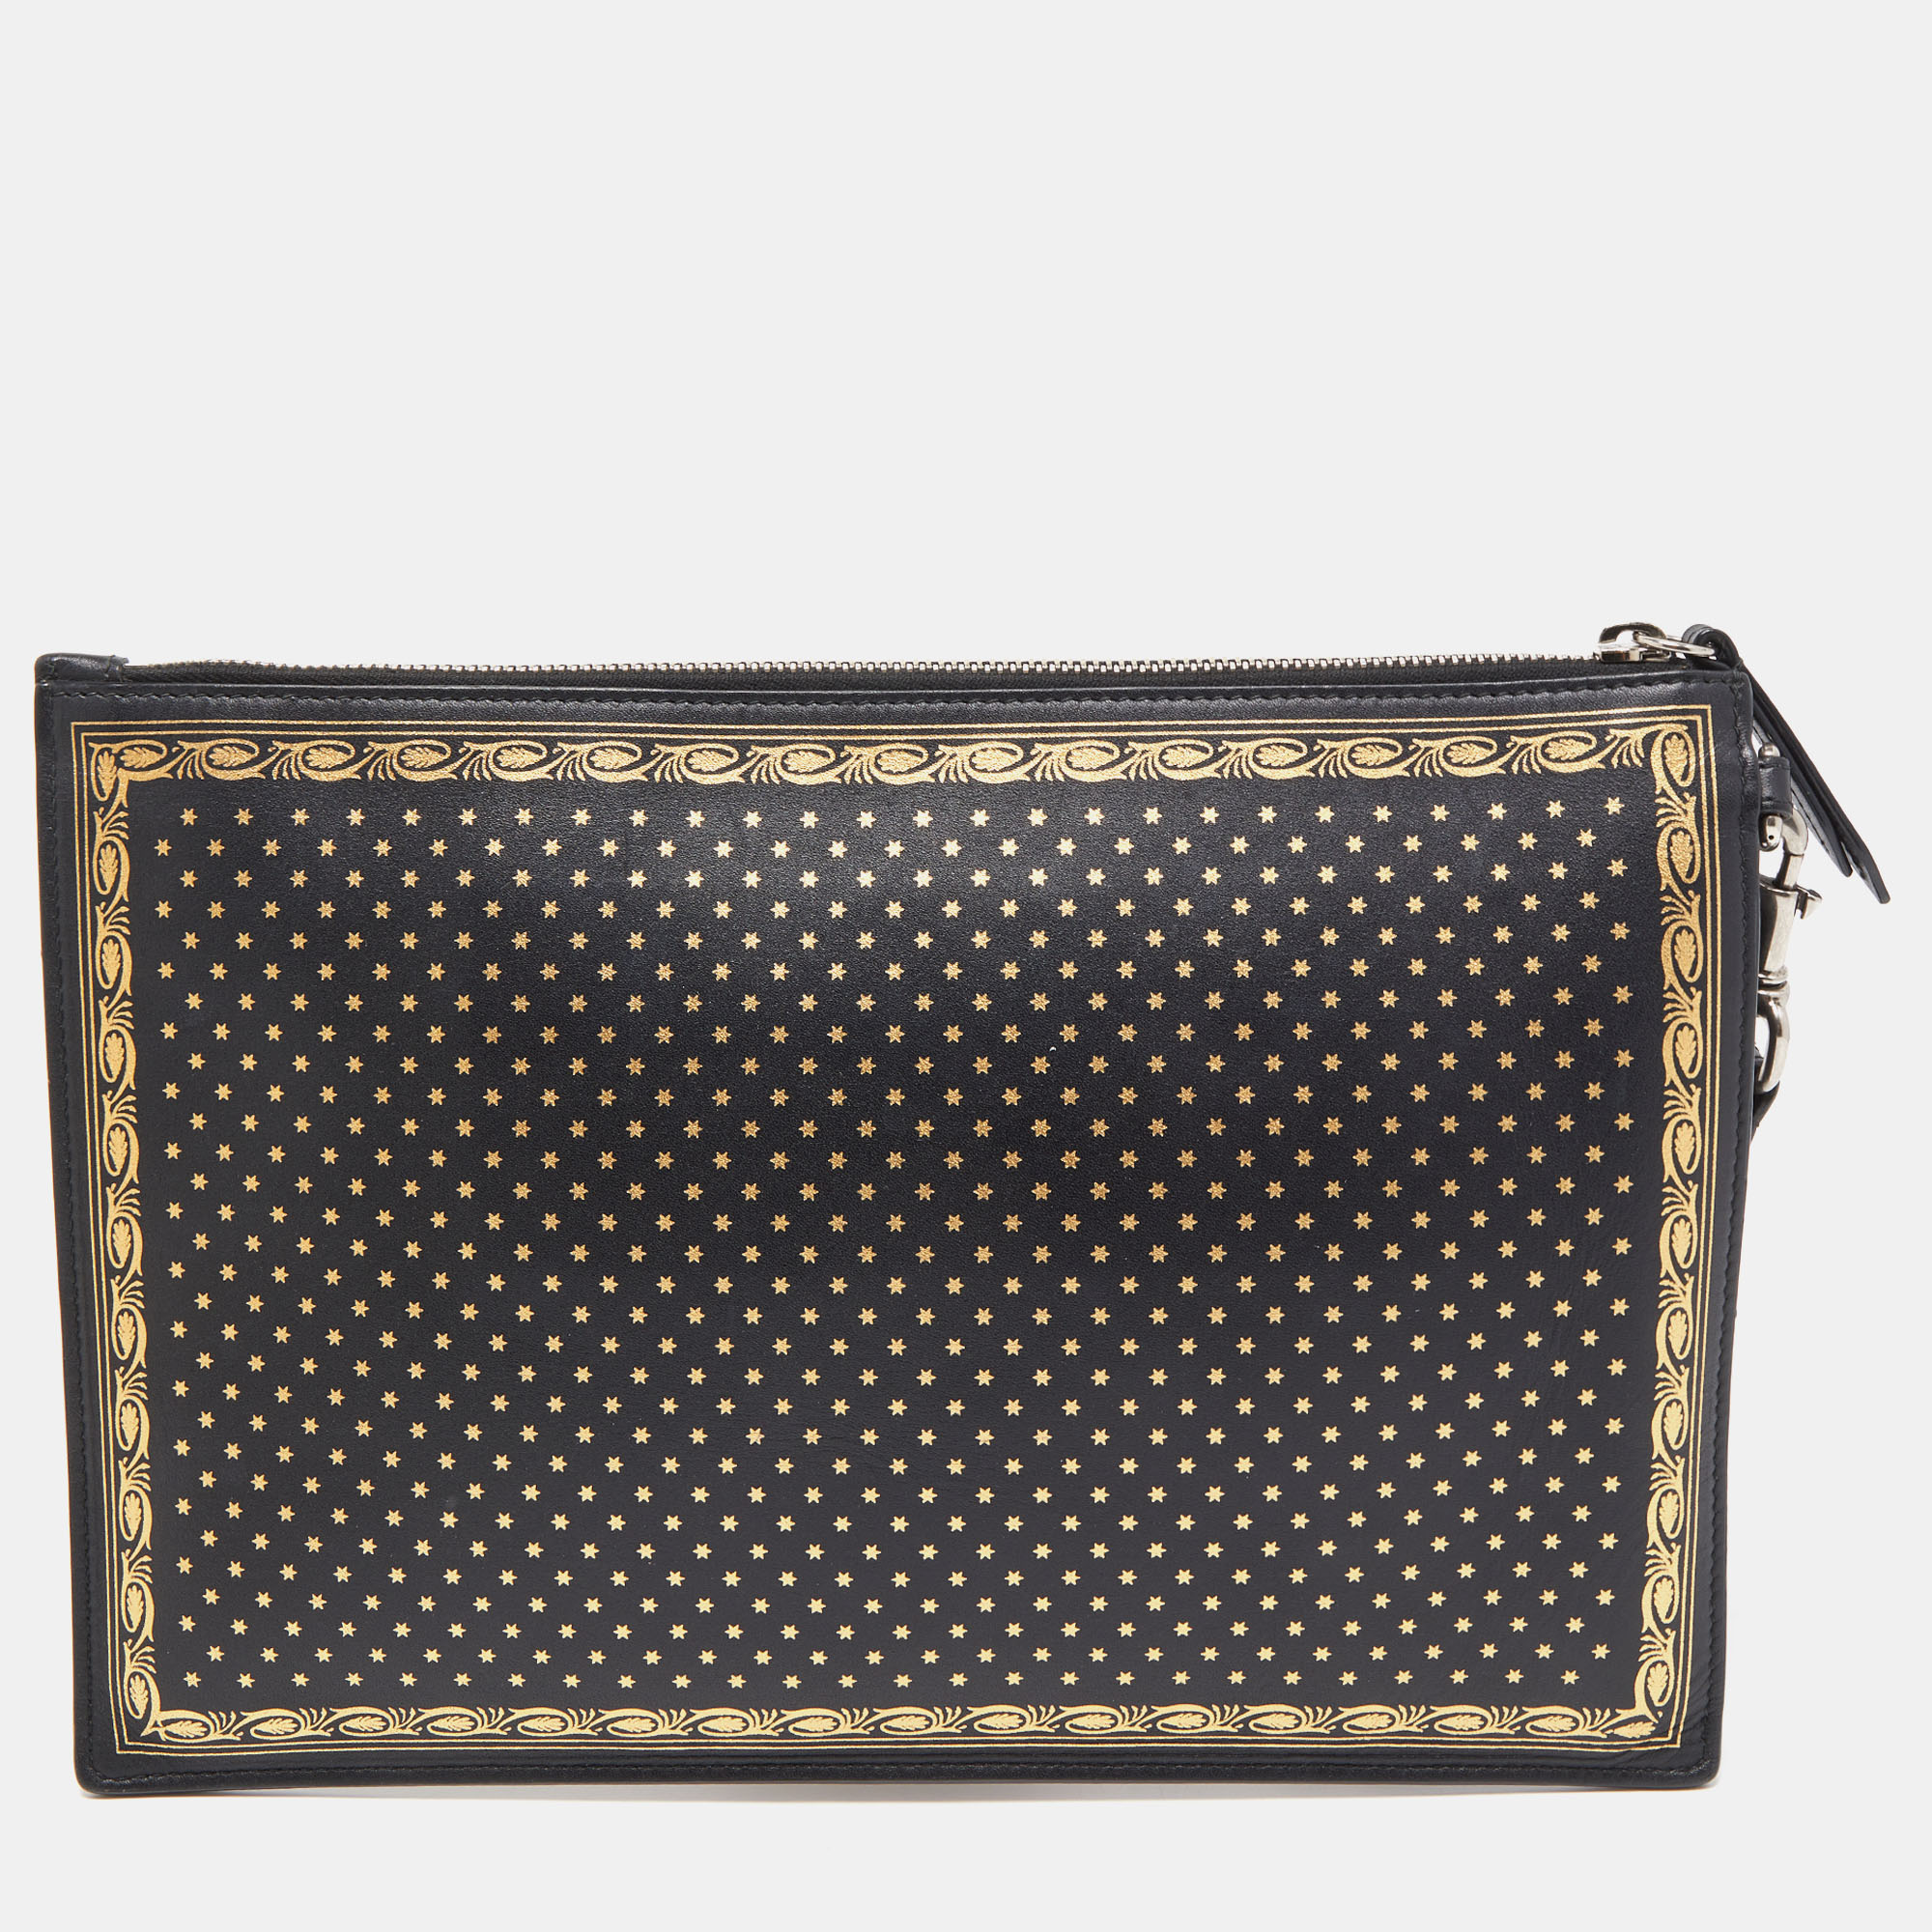 Gucci Black/Gold Leather 'Guccy' Zip Wristlet Clutch